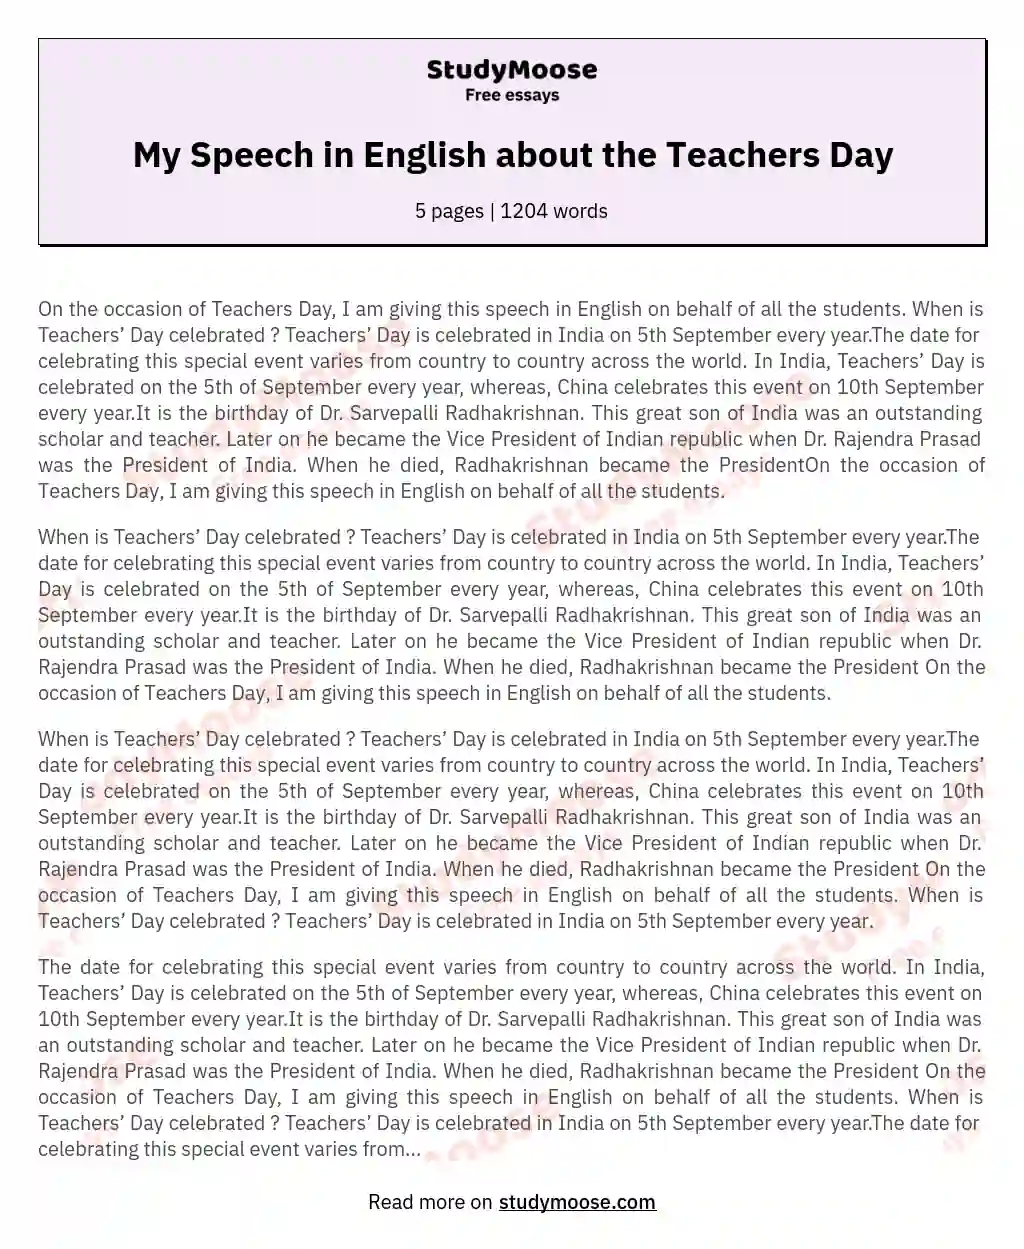 My Speech in English about the Teachers Day